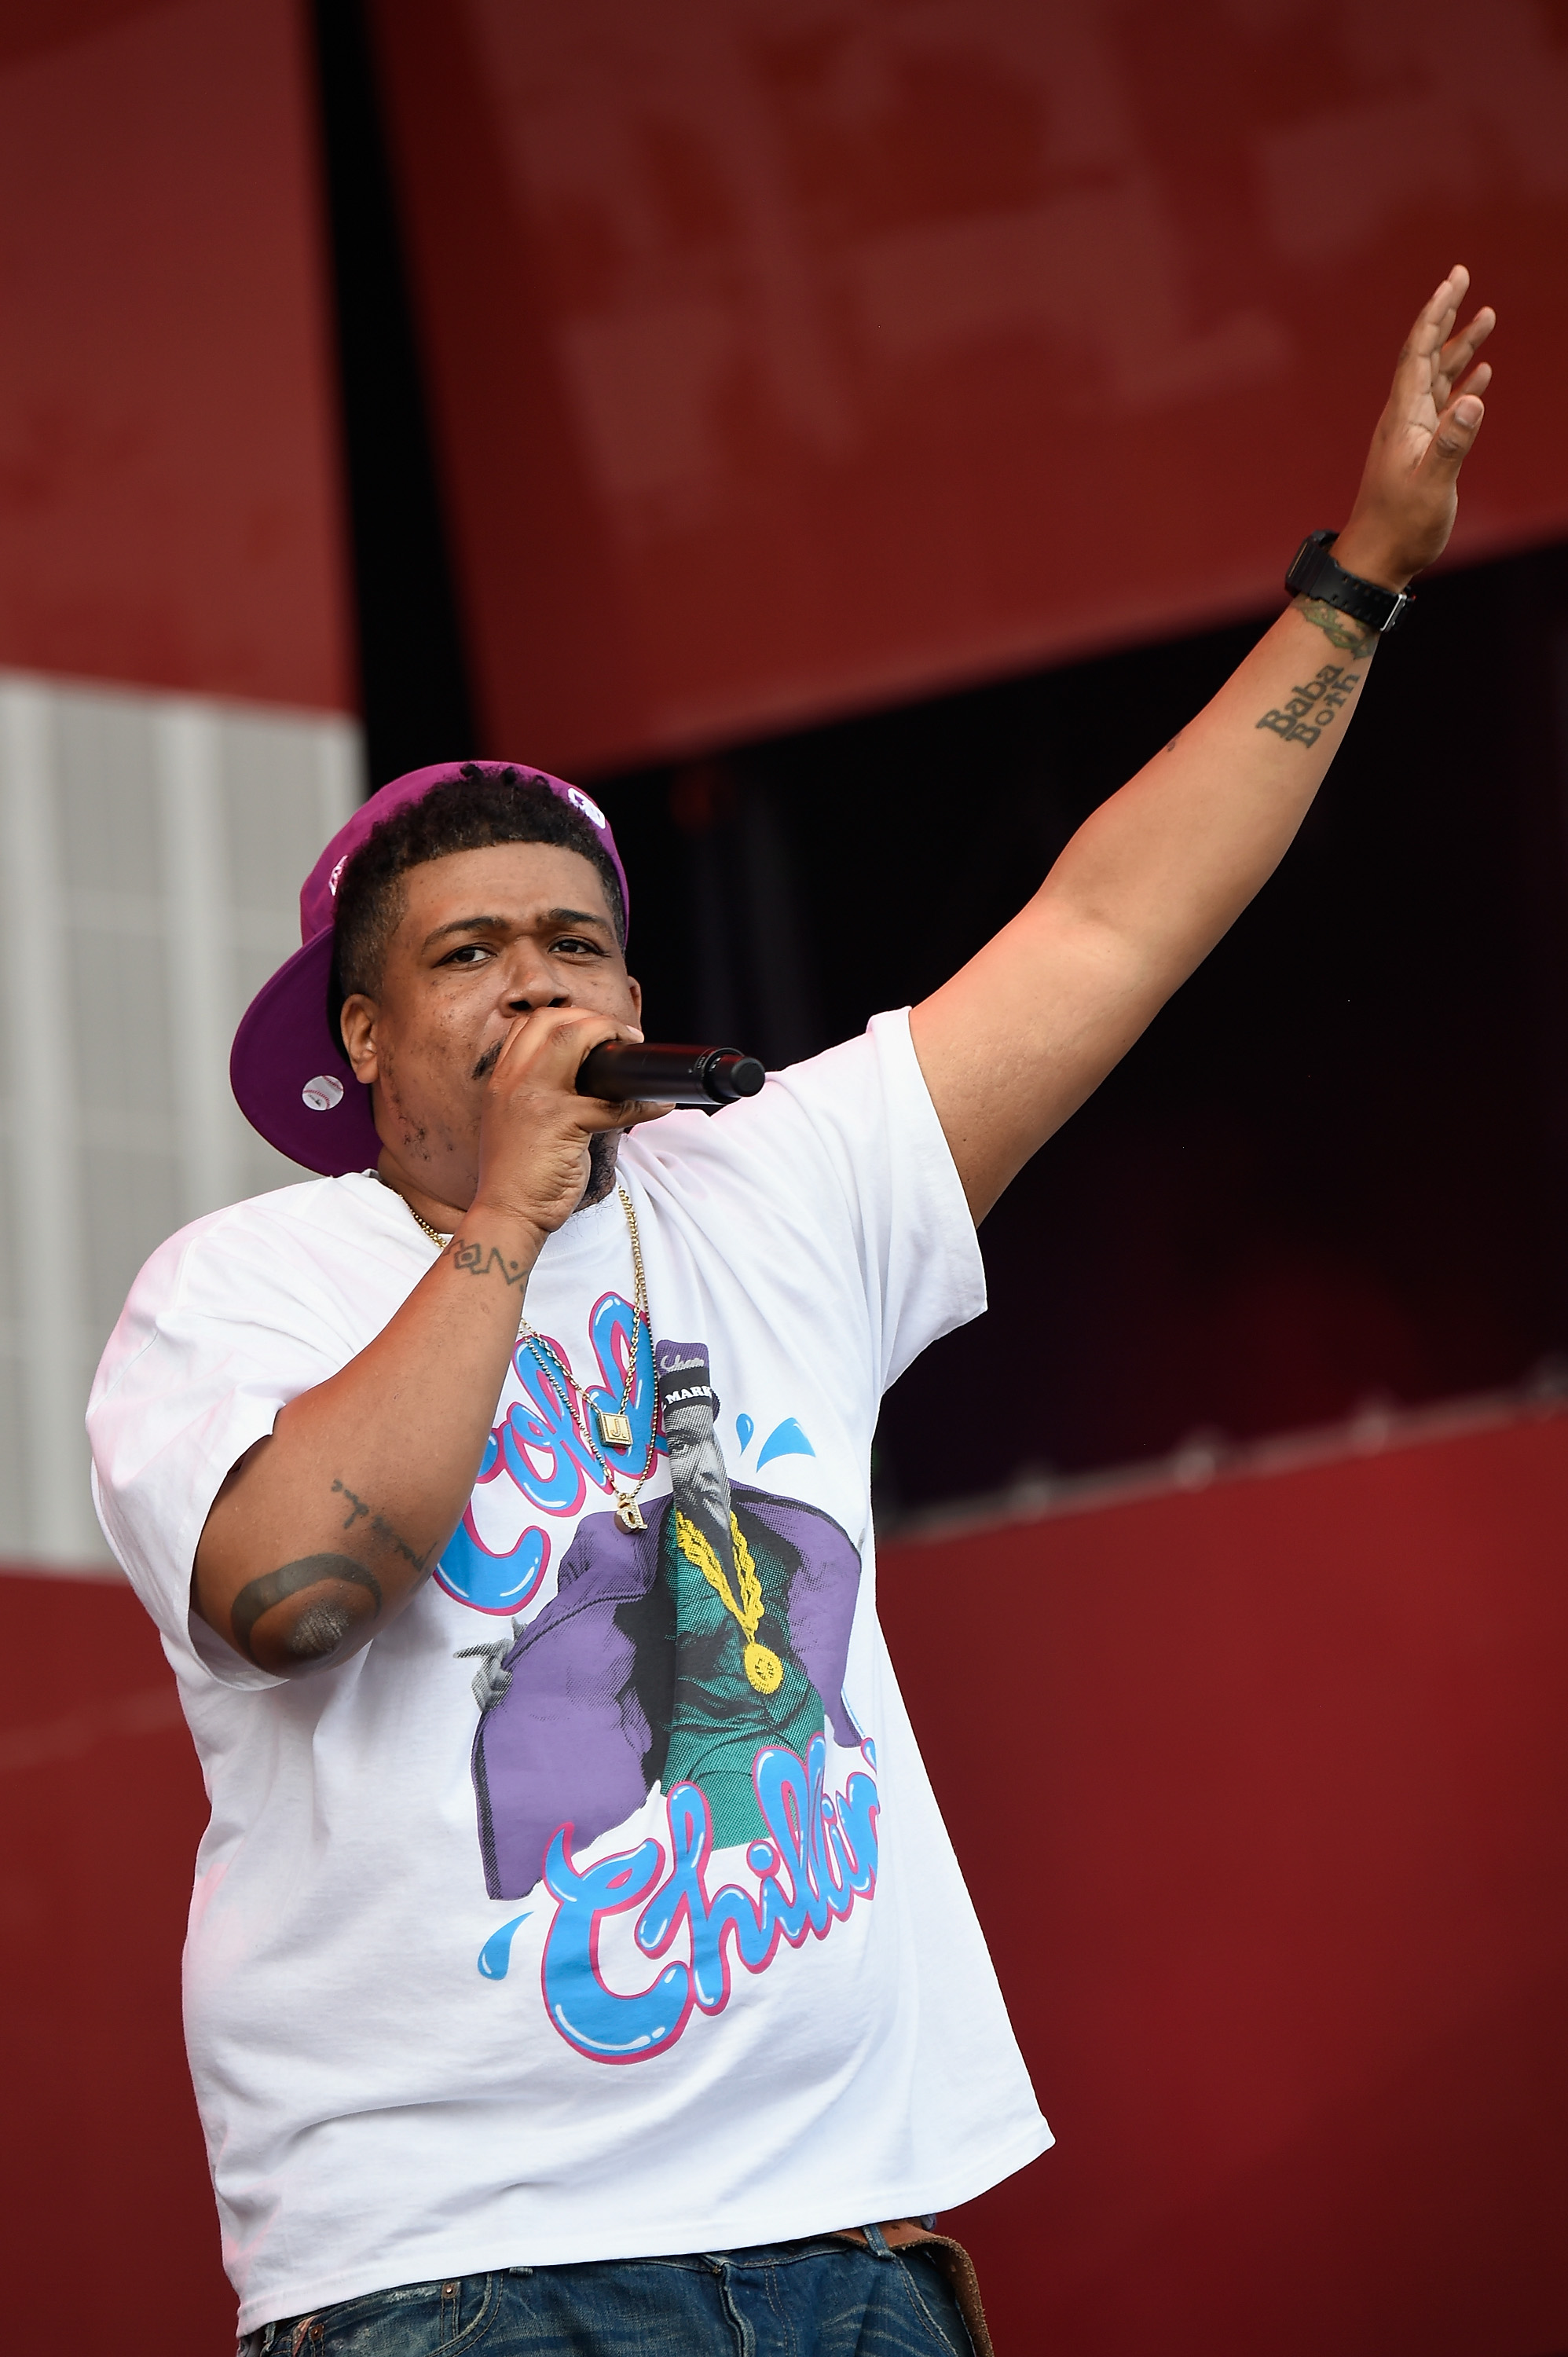 PHILADELPHIA, PA - SEPTEMBER 05:  David Jude Jolicoeur of De La Soul performs onstage during the 2015 Budweiser Made in America Festival at Benjamin Franklin Parkway on September 5, 2015 in Philadelphia, Pennsylvania.  (Photo by Kevin Mazur/Getty Images for Anheuser-Busch)